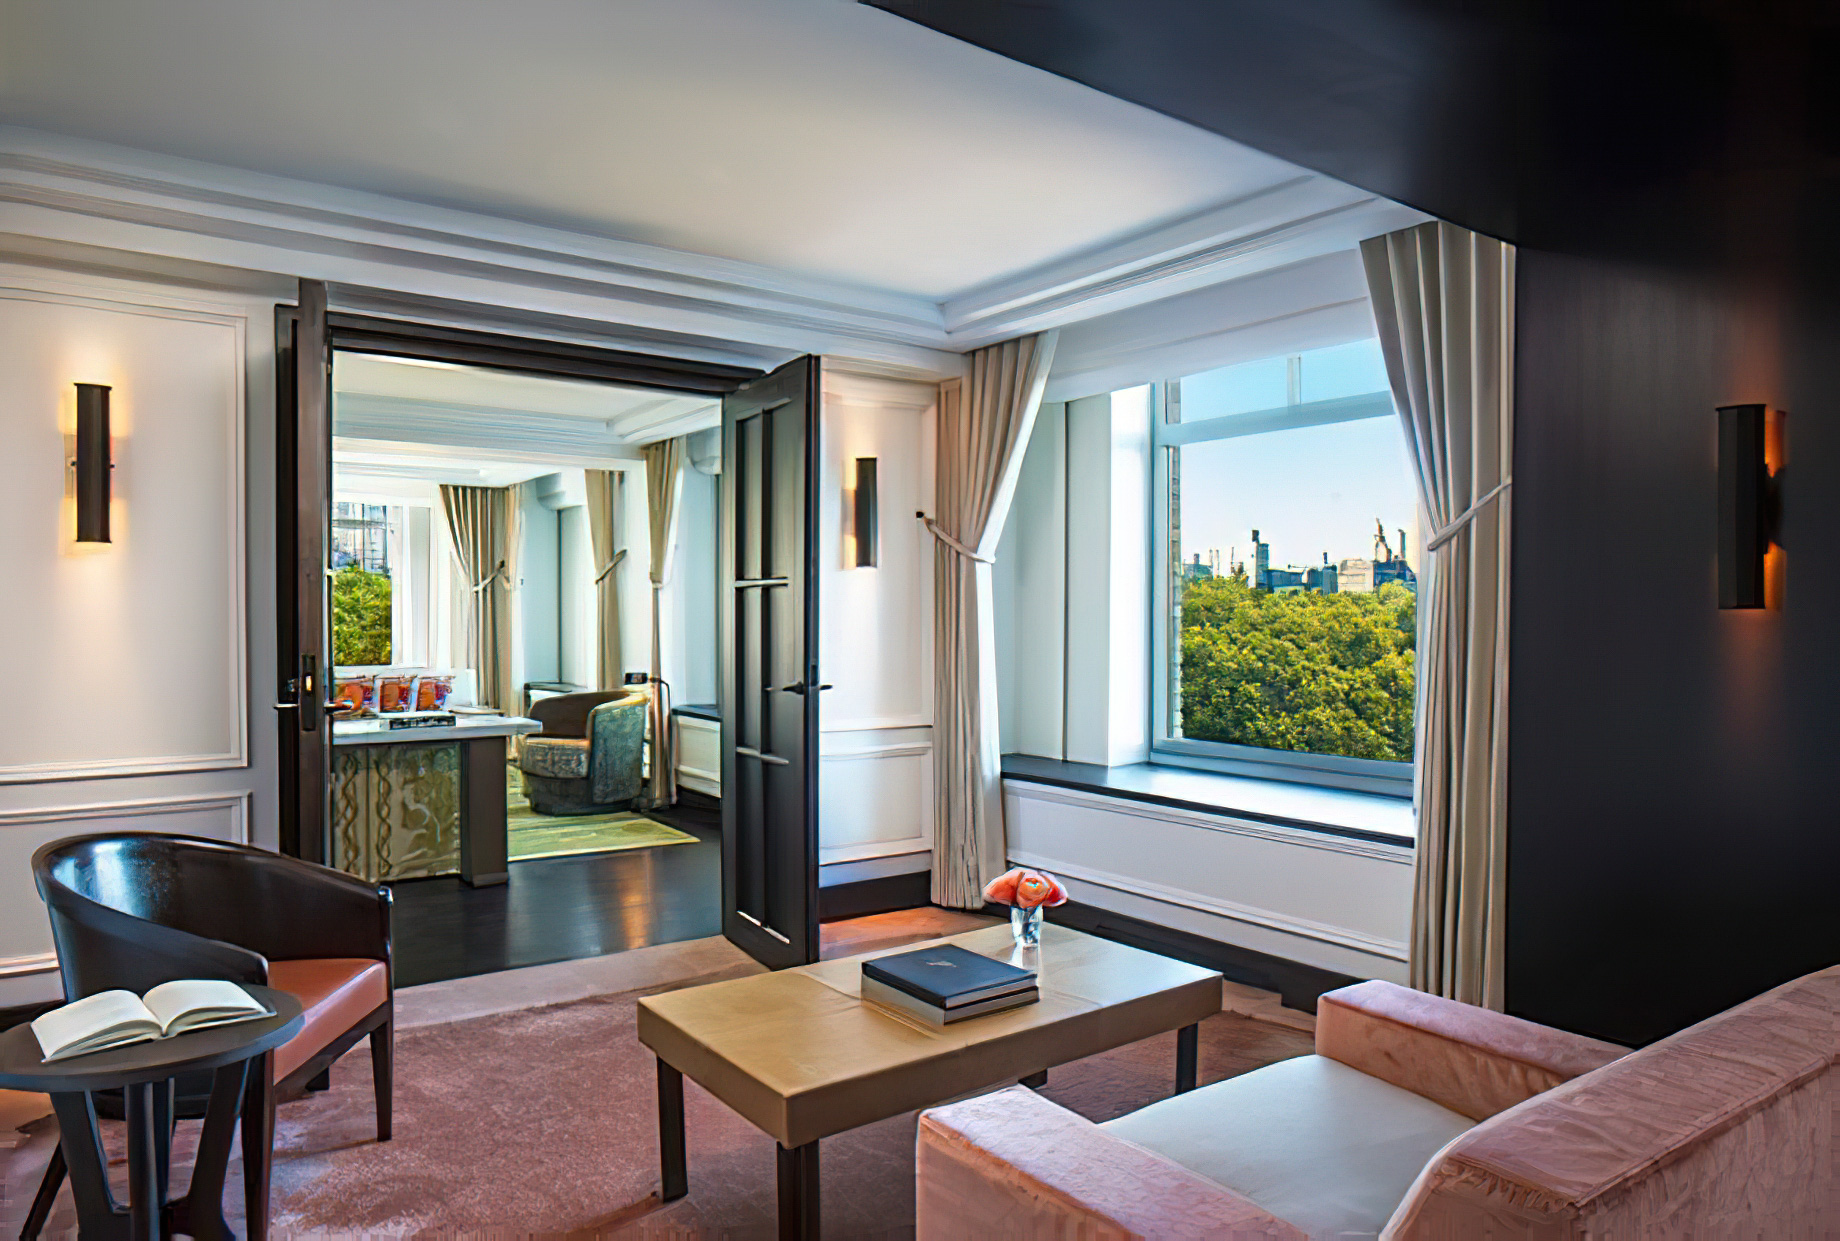 The Ritz-Carlton New York, Central Park Hotel - New York, NY, USA - The Presidential Suite Master Bedroom Lounge